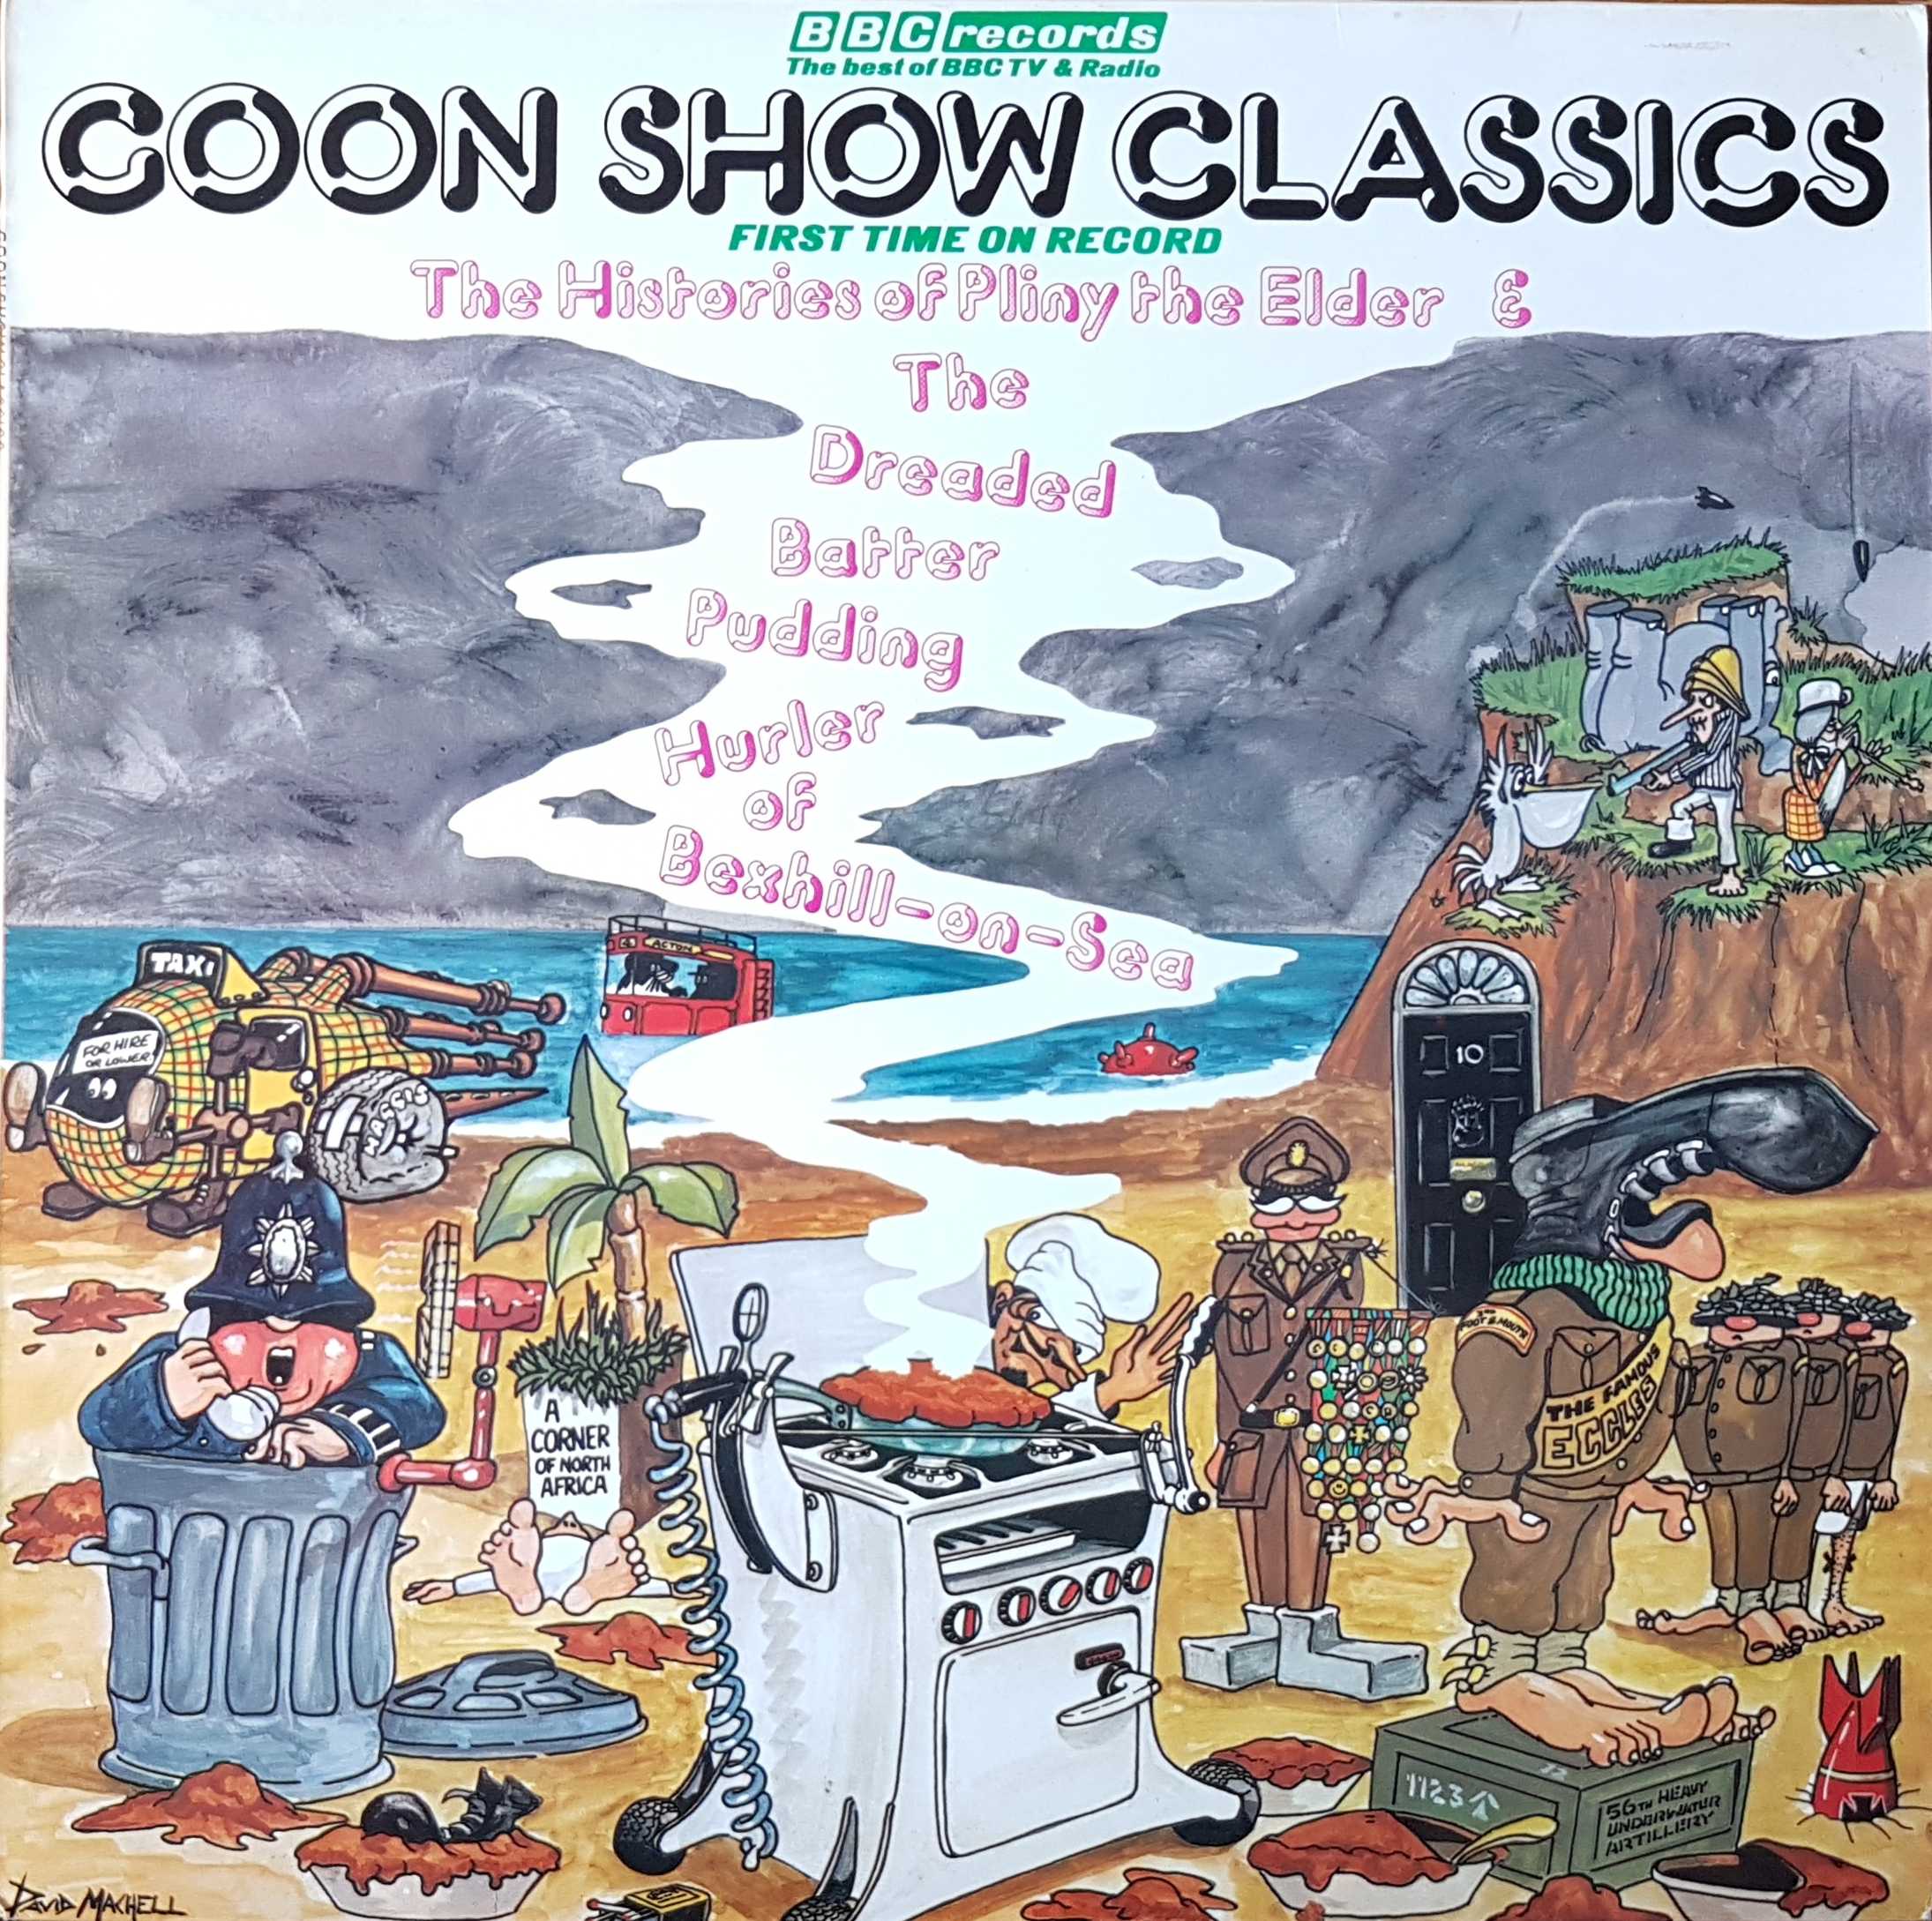 Picture of REB 177 Goon show classics by artist Spike Milligan from the BBC records and Tapes library